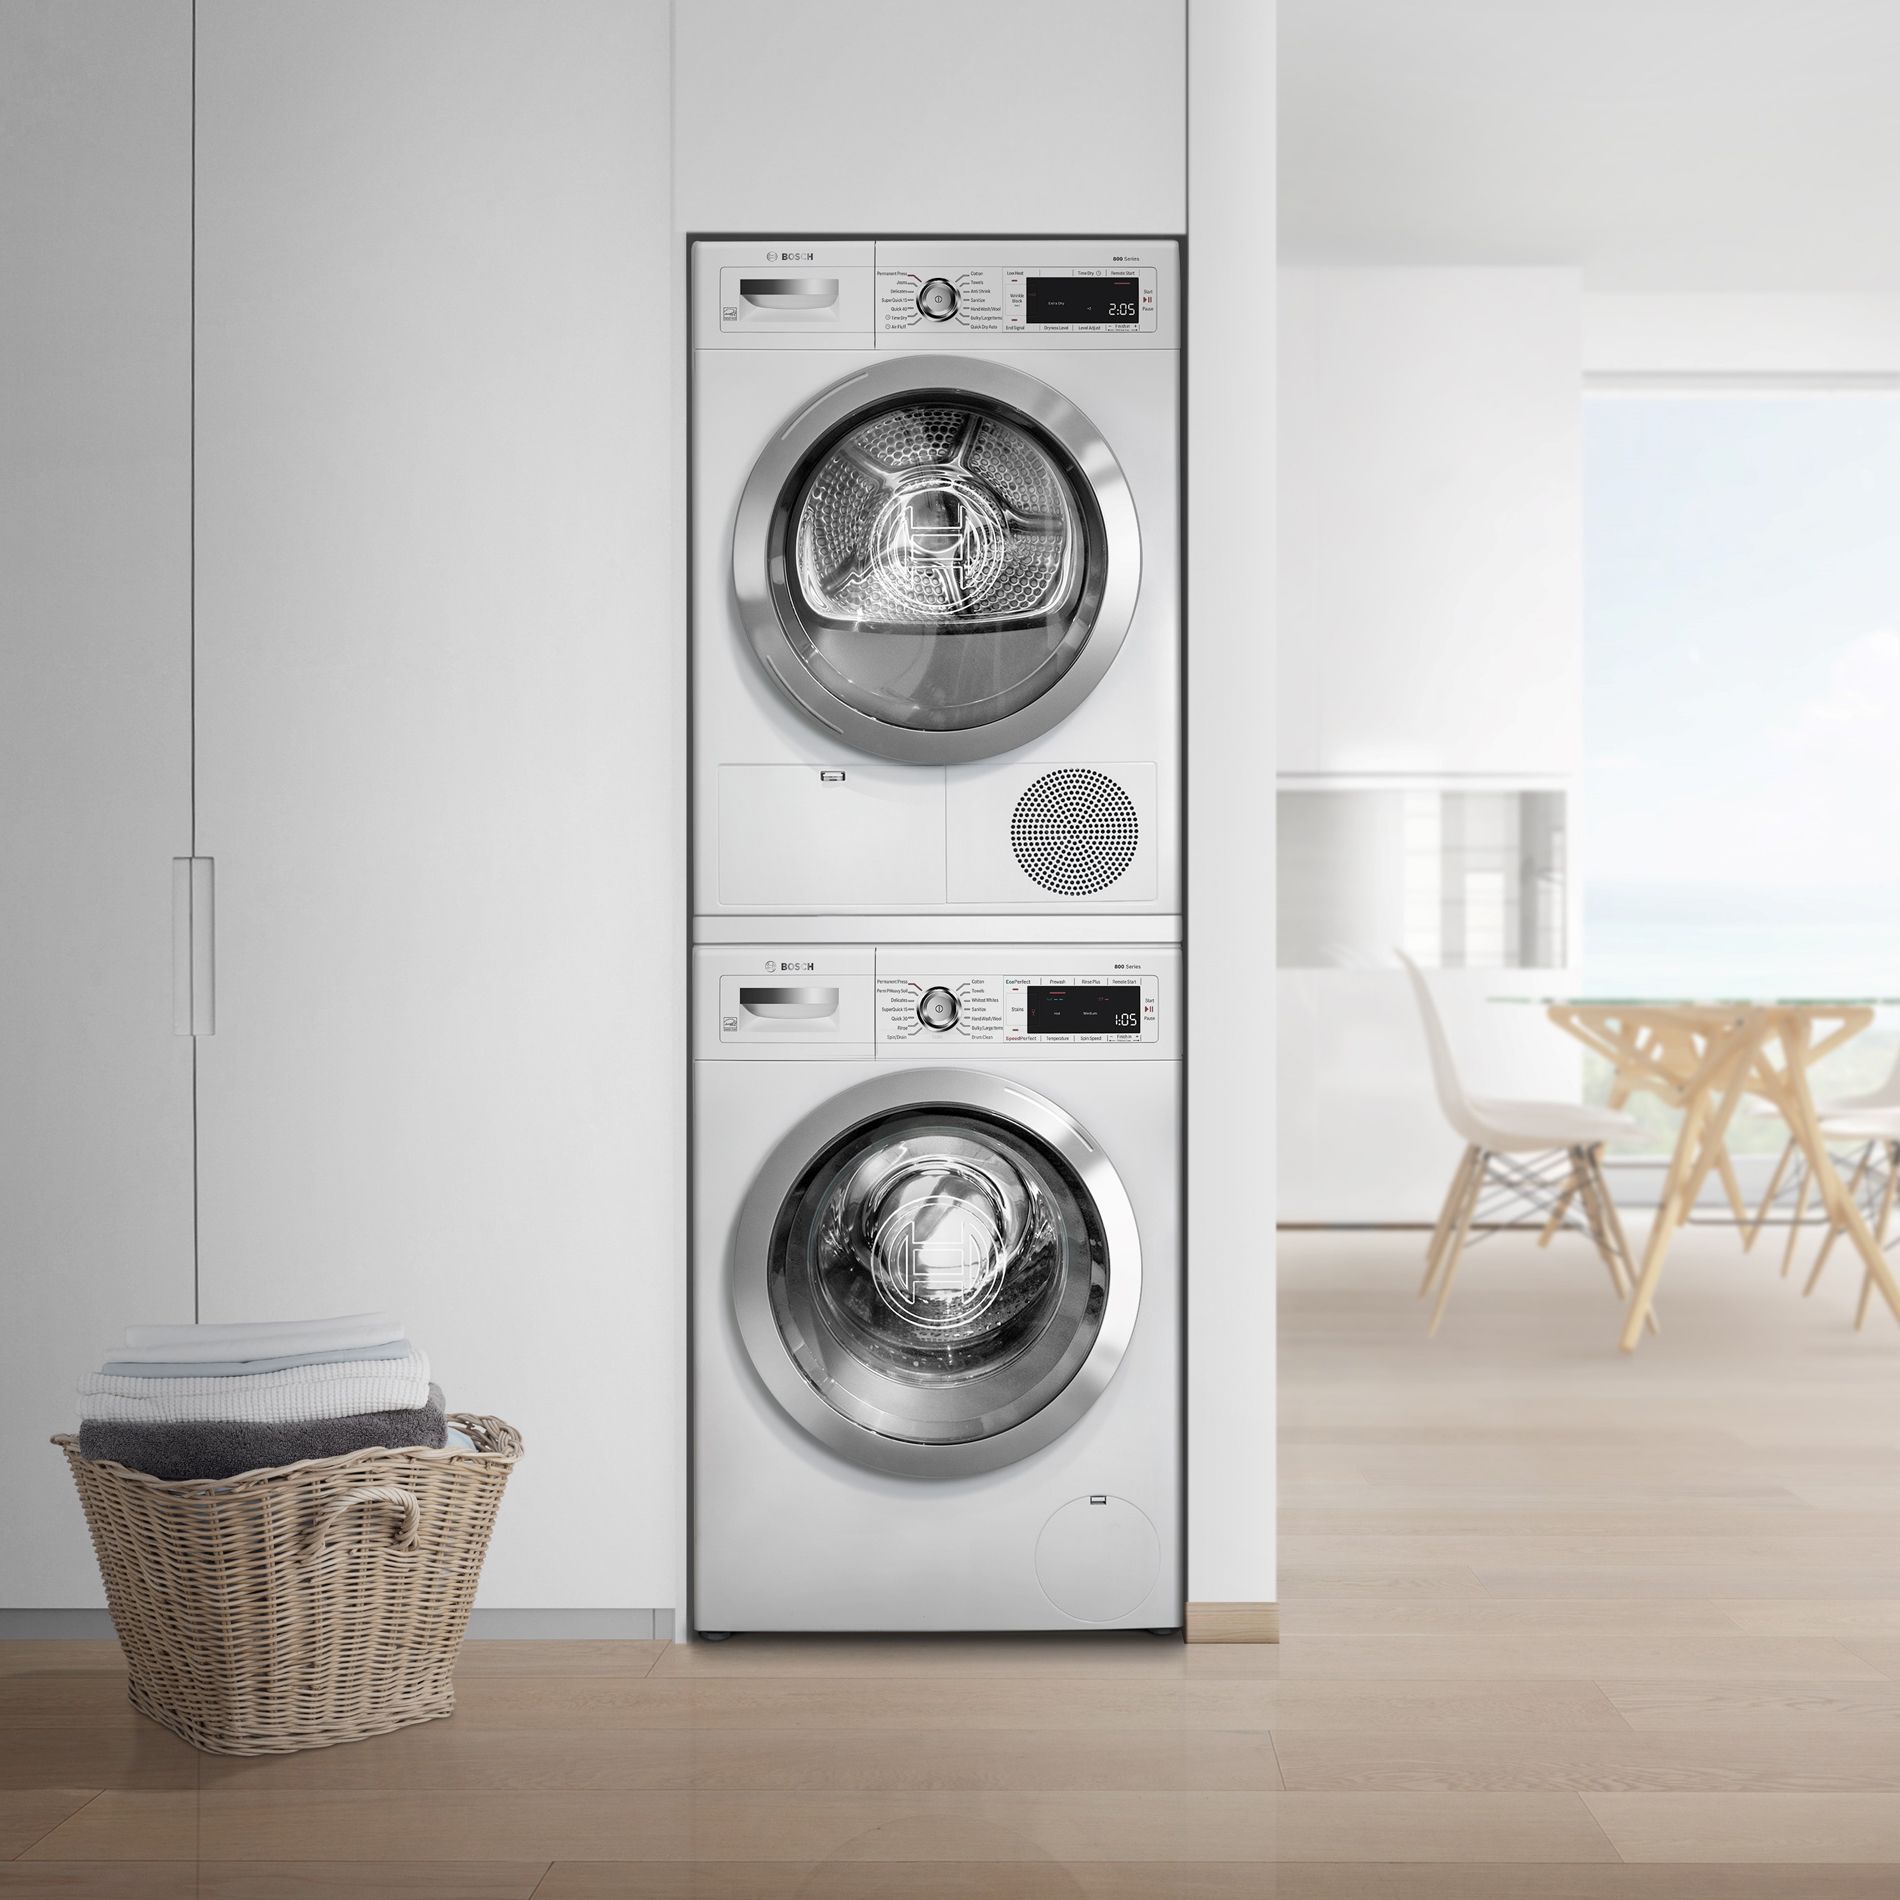 How Tall Is A Stacked Washer Dryer